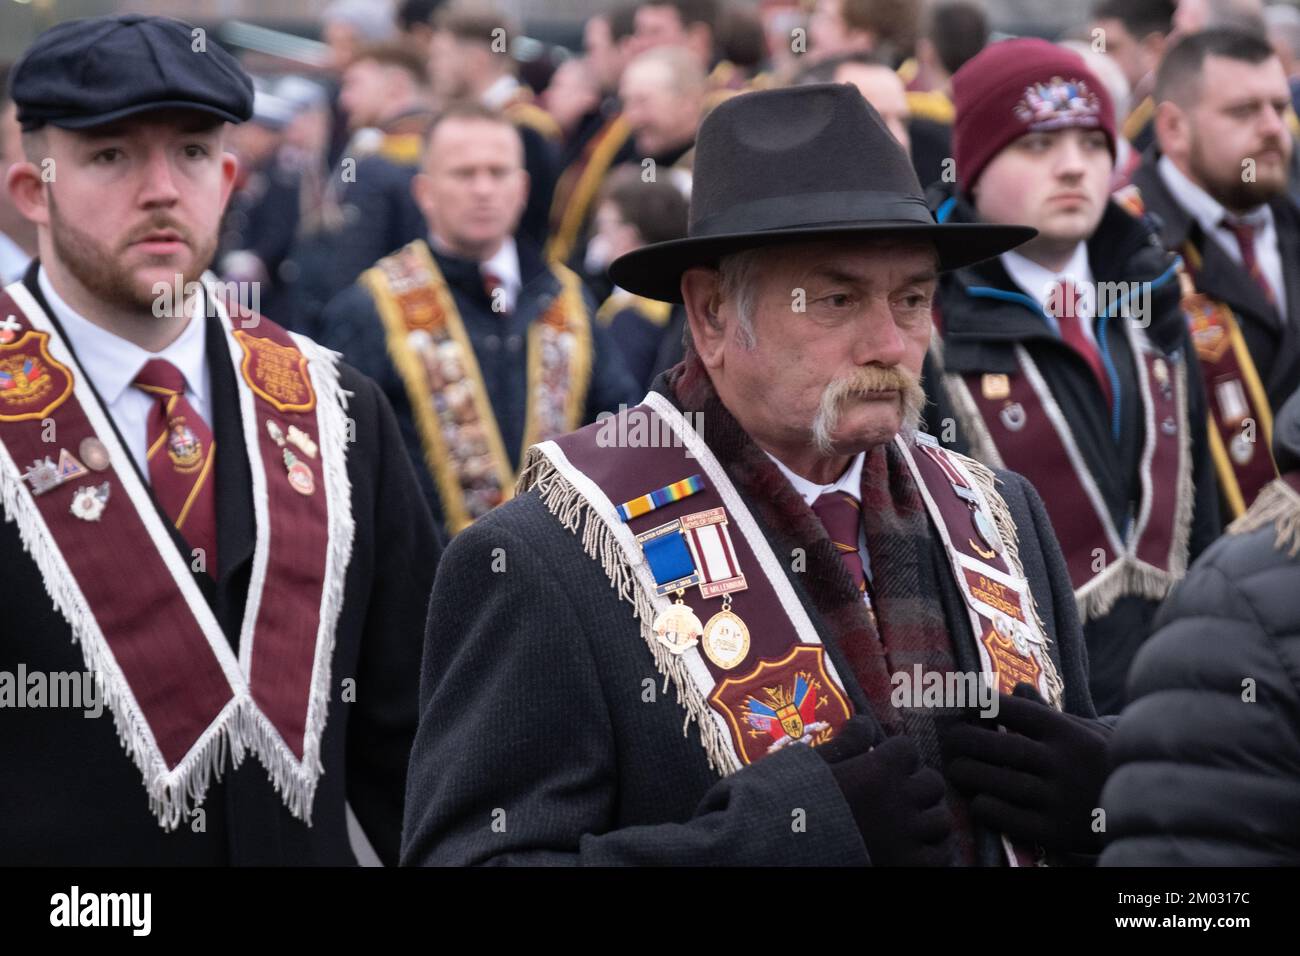 Londonderry, United Kingdom. 3 Dec, 2022. Members of the Apprentice Boys of Derry parading at Shutting of the Gates 2022. Credit: Steve Nimmons/Alamy Live News Stock Photo